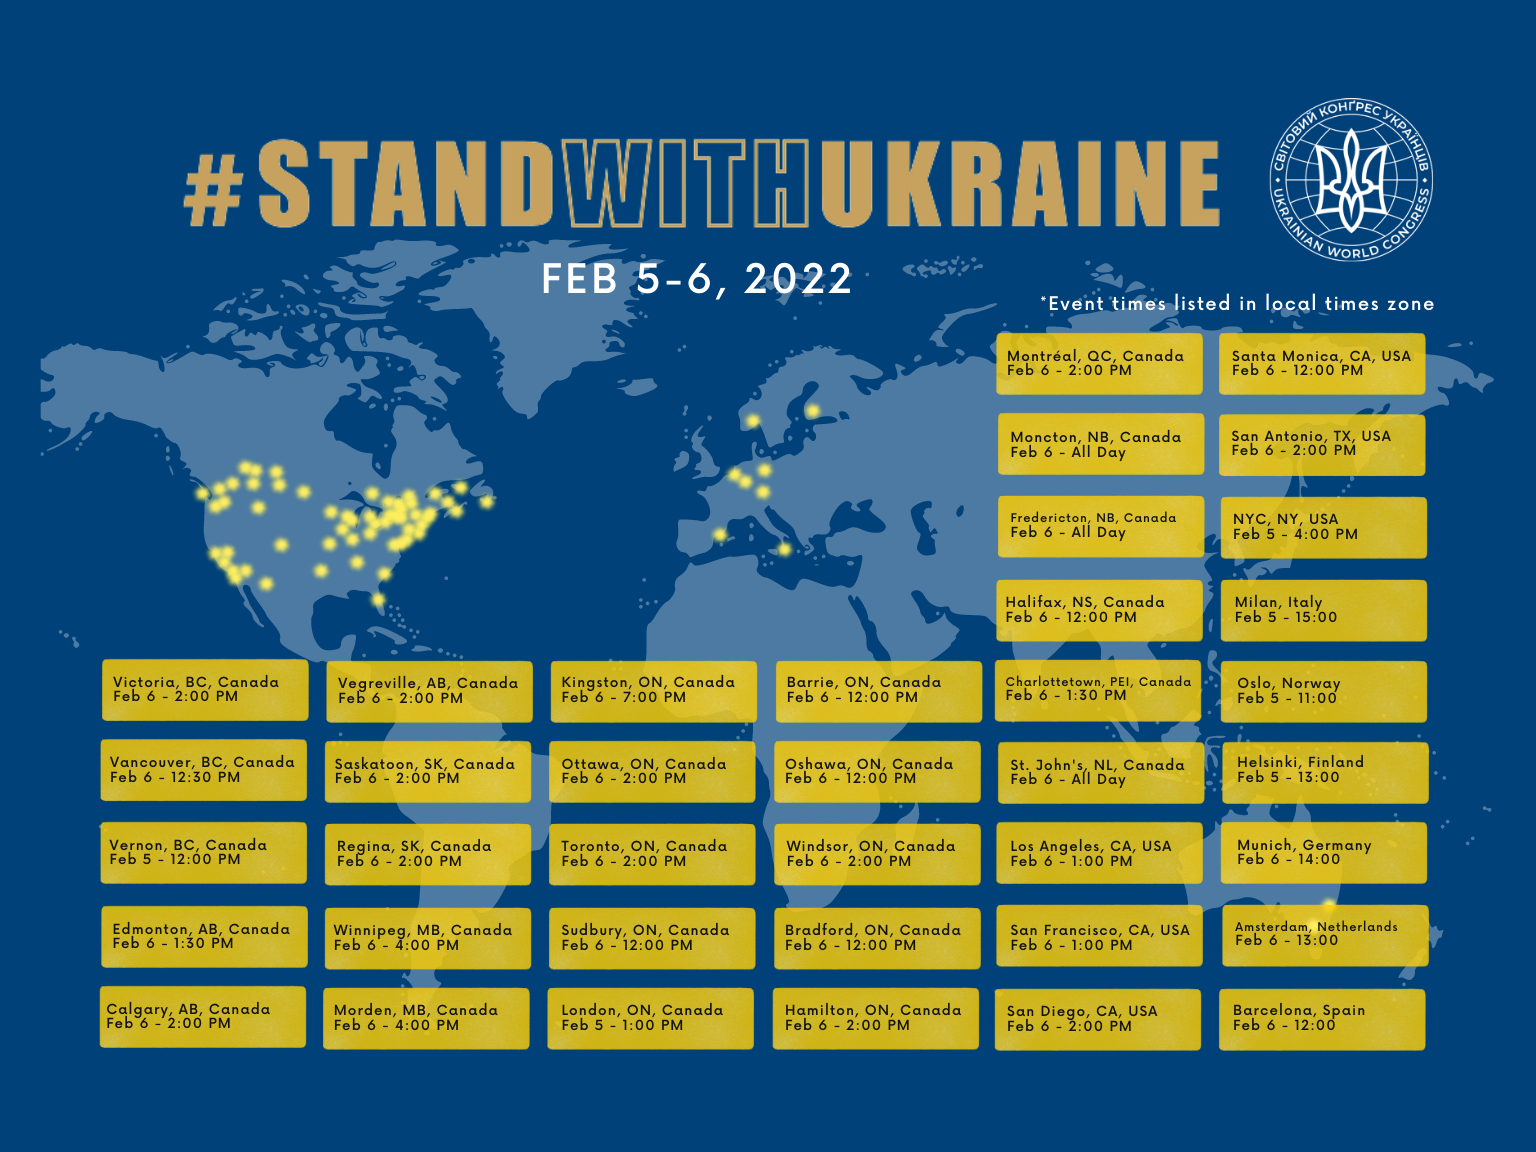 #StandWithUkraine global call continues this weekend